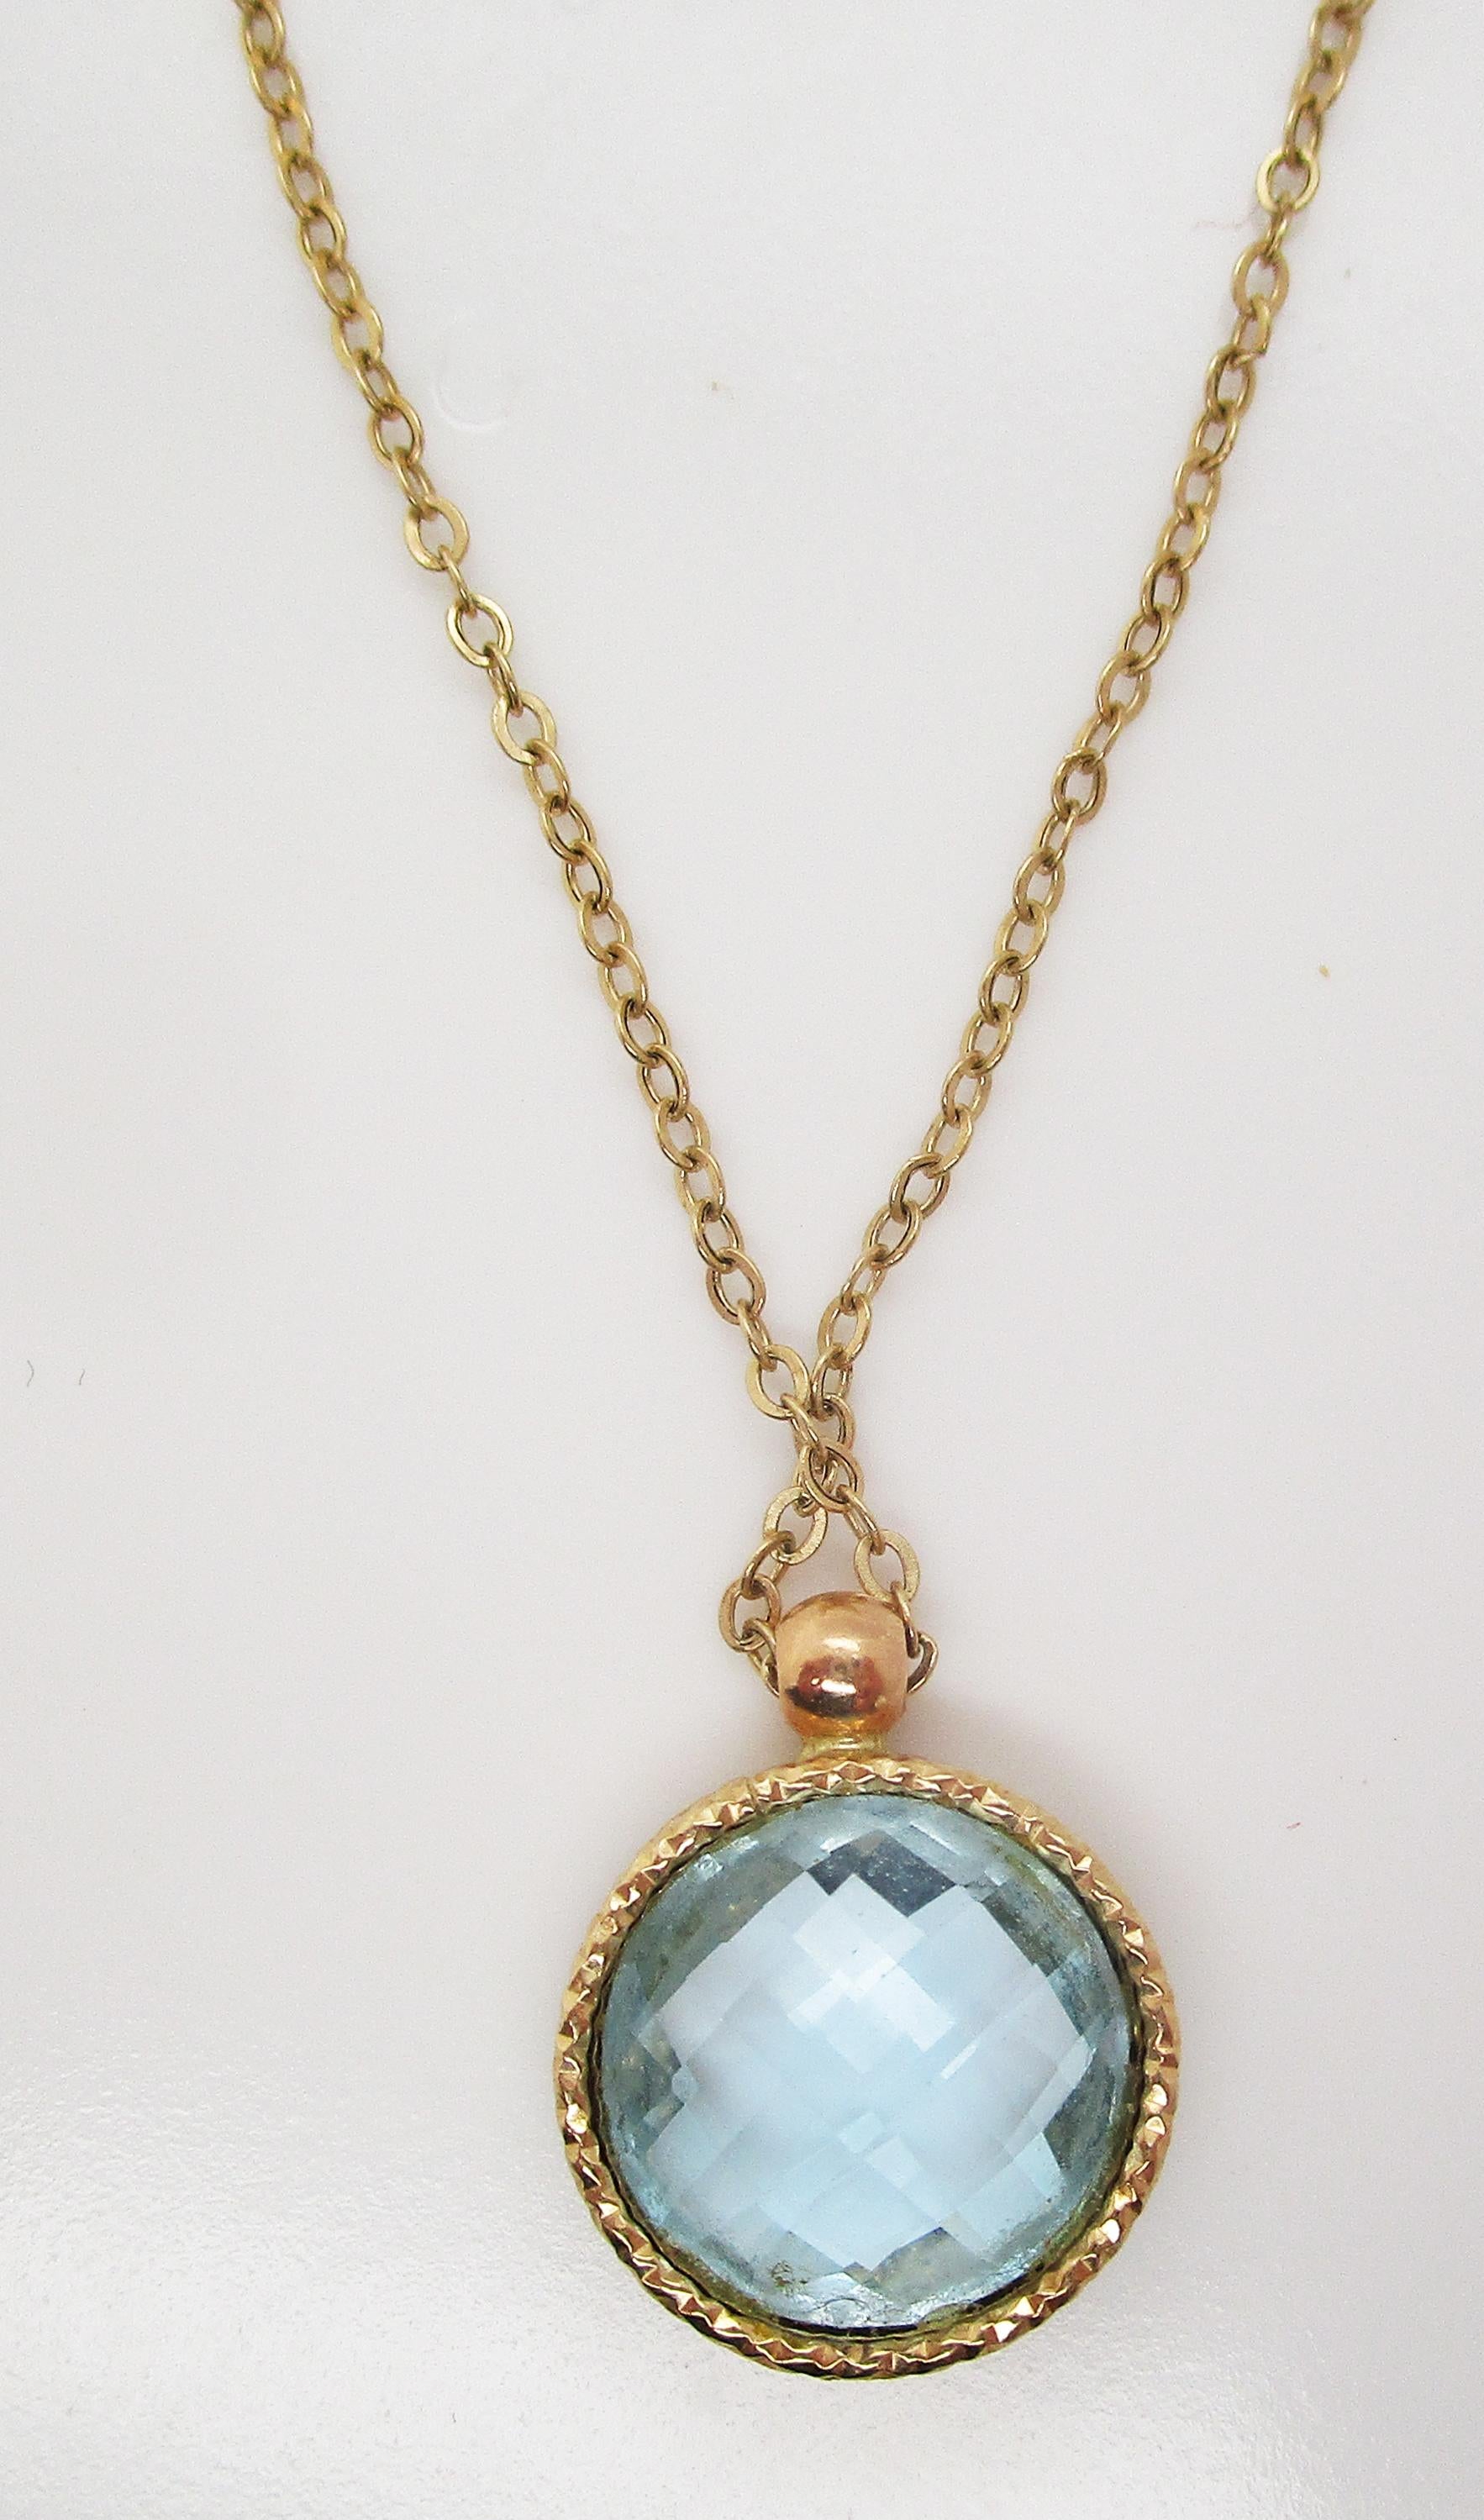 This is a lovely blue topaz pendant in 14k yellow gold on a matching chain. The delicate pendant combines the bright warmth of yellow gold with the ethereal seafoam blue of topaz in a beautiful and versatile look!
This pendant and chain would look